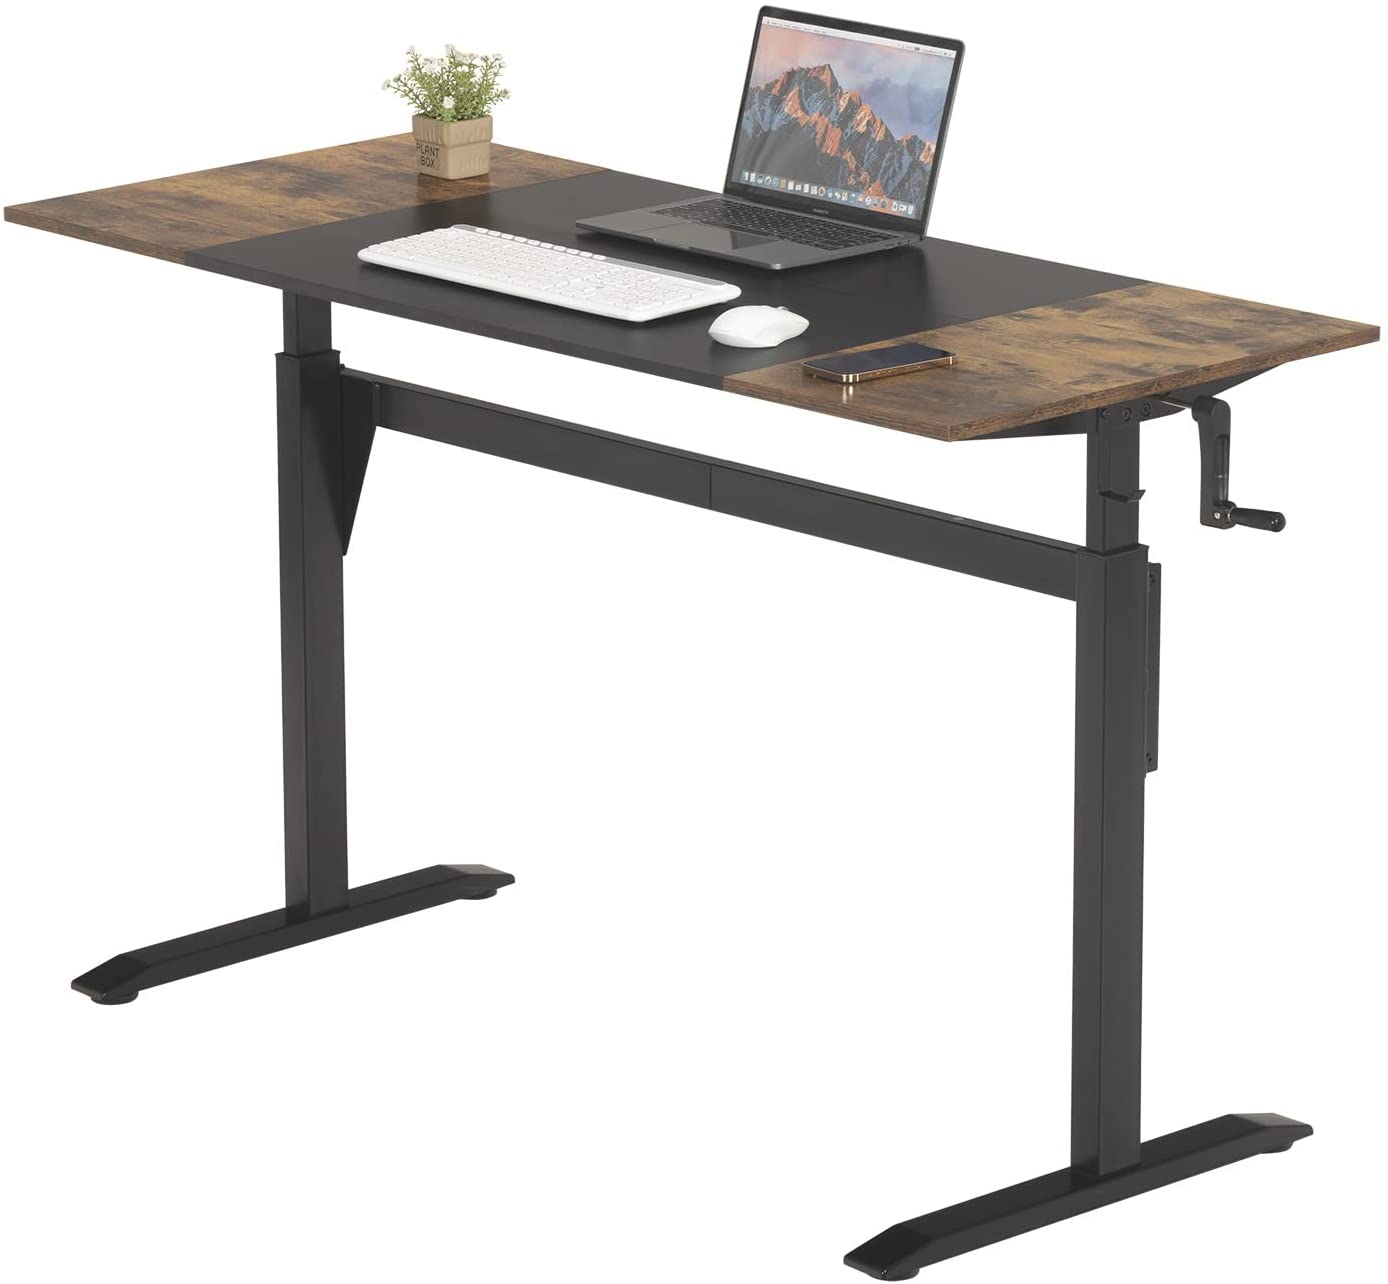 UNICOO - Crank Adjustable Height Standing Desk, Game Table, Home Office Table, Computer Table 55 * 23.6 in Tabletop (XJH-C-55 Black)